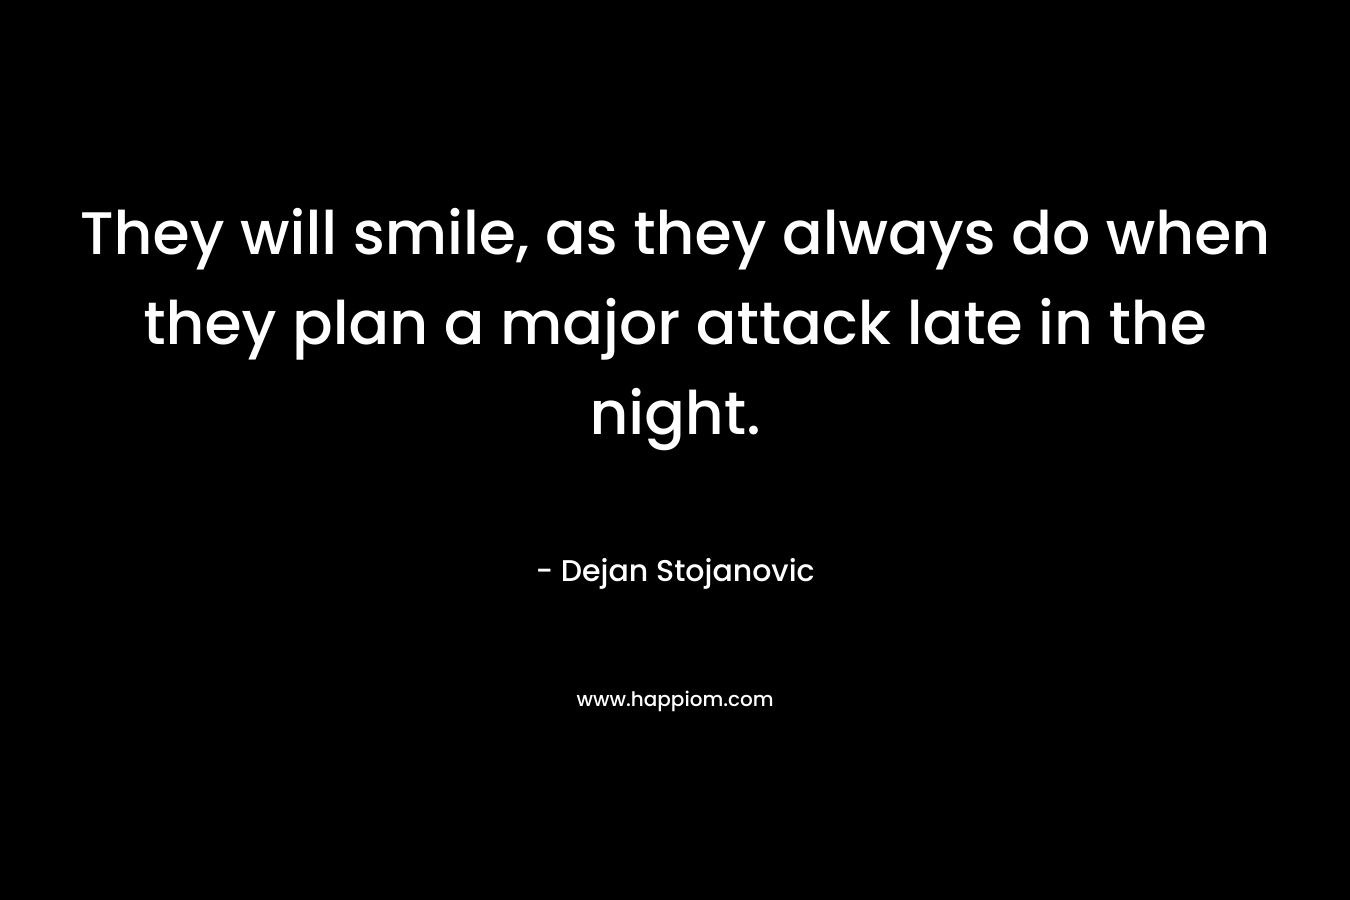 They will smile, as they always do when they plan a major attack late in the night.